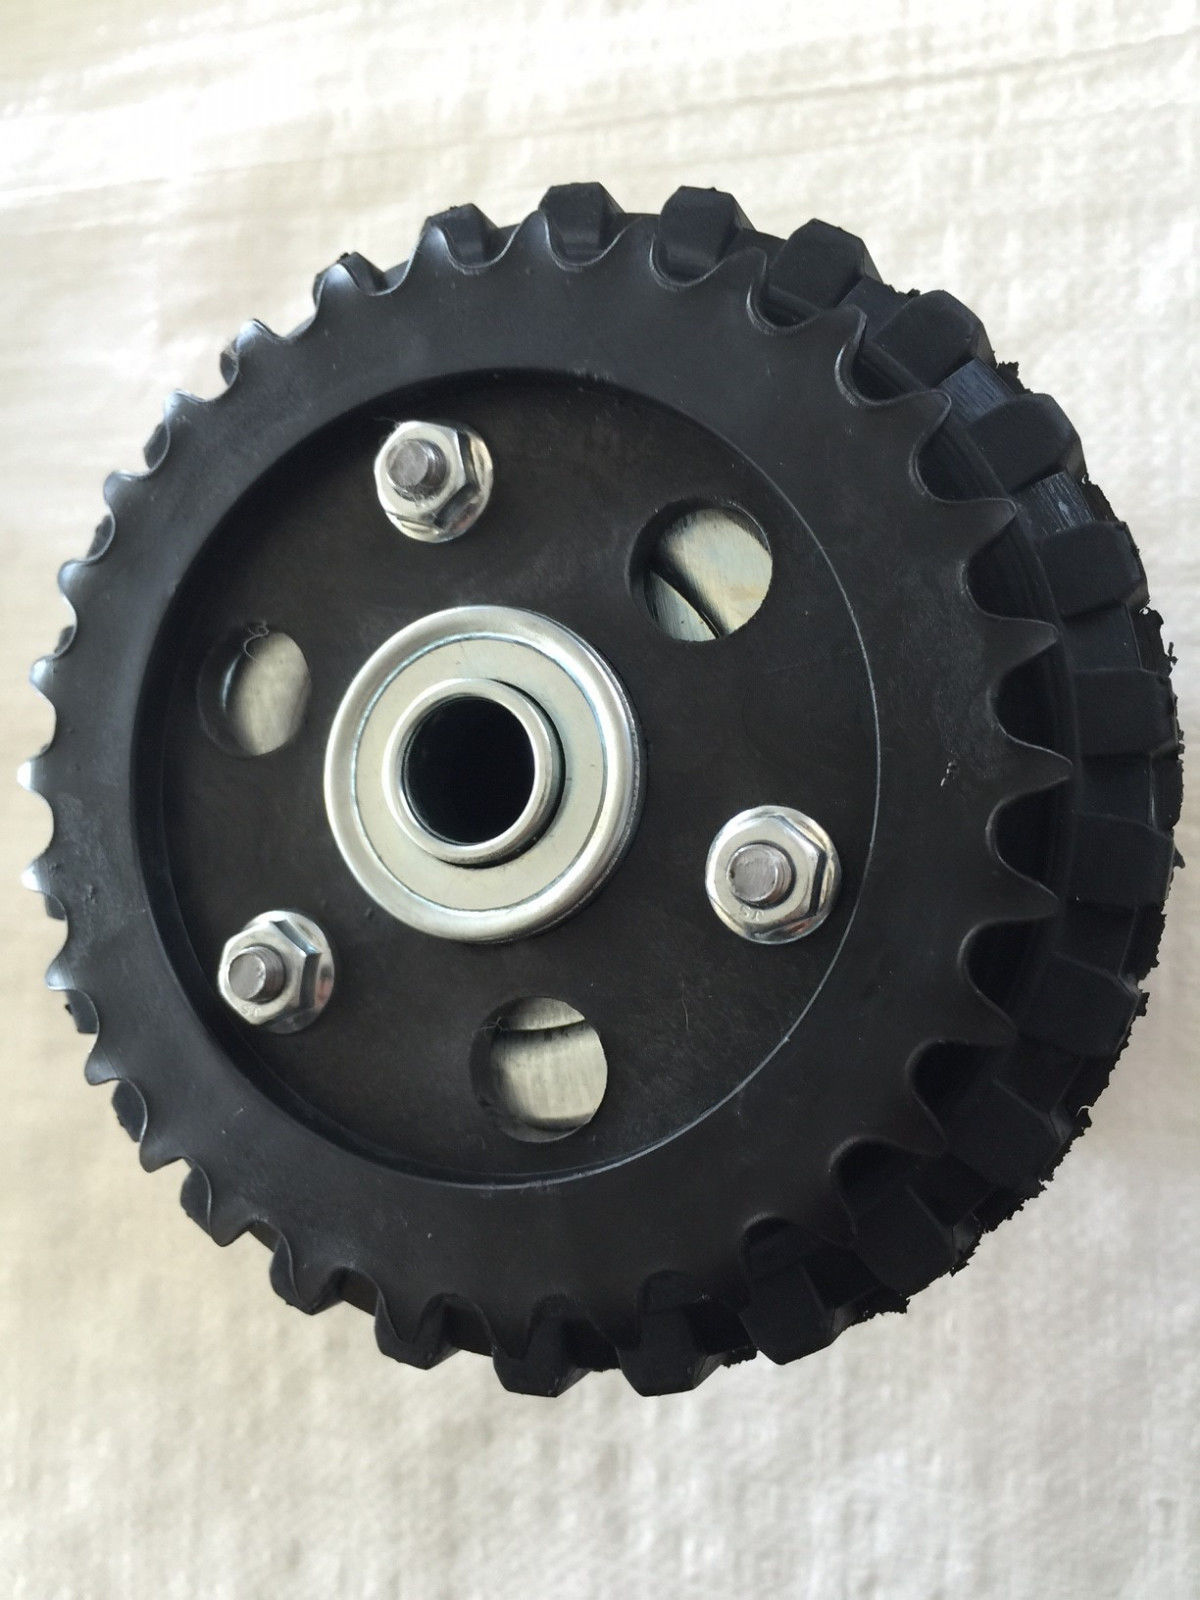  Mclane 20-25 Front Throw Mower Roller Drive Sprocket (30  tooth) Part#1038 .#GH45843 3468-T34562FD382061 : Patio, Lawn & Garden